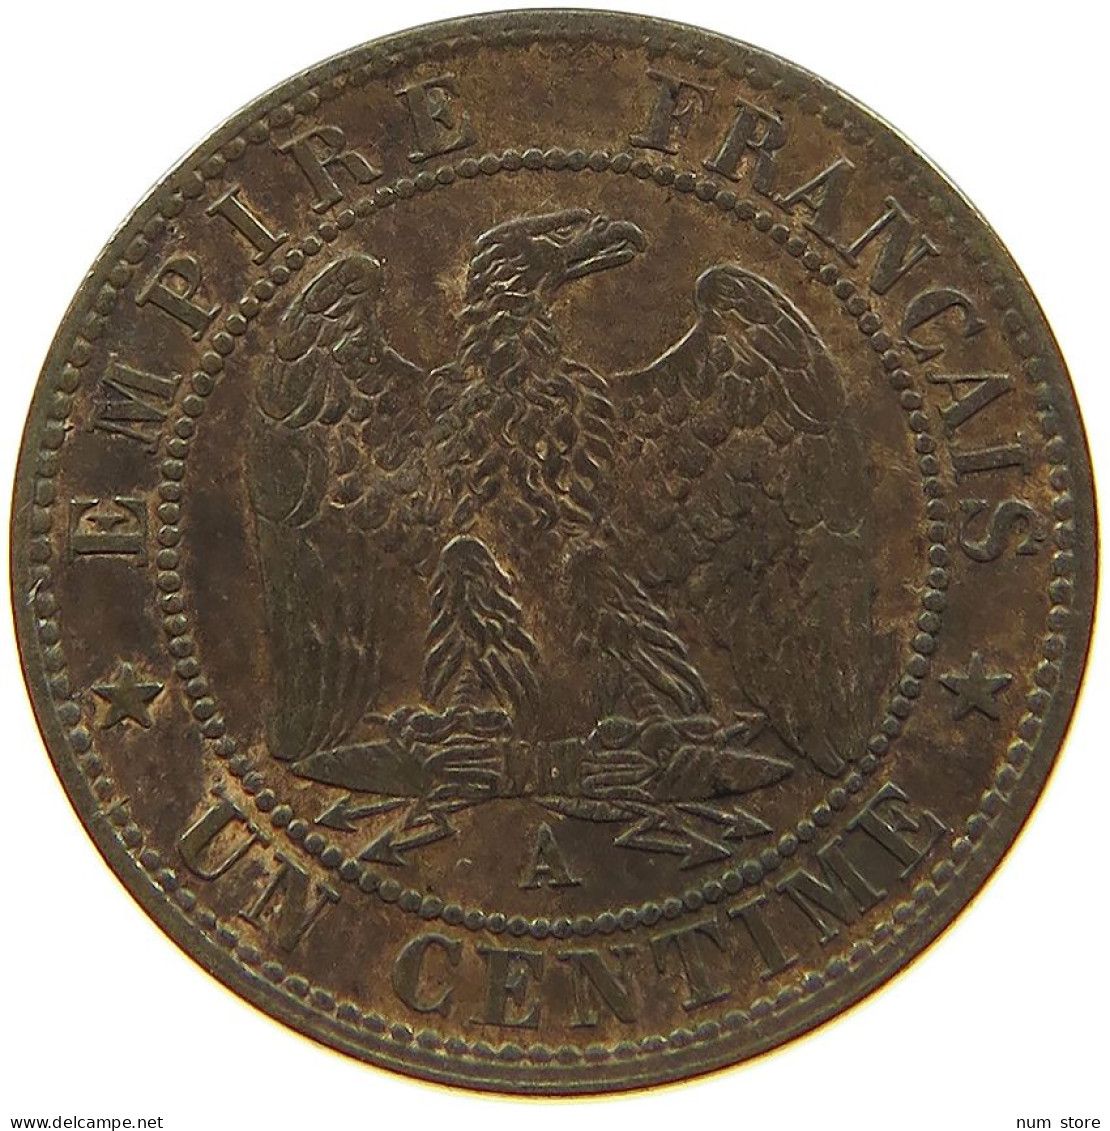 FRANCE CENTIME 1862 A Napoleon III. (1852-1870) #c001 0213 - 1 Centime